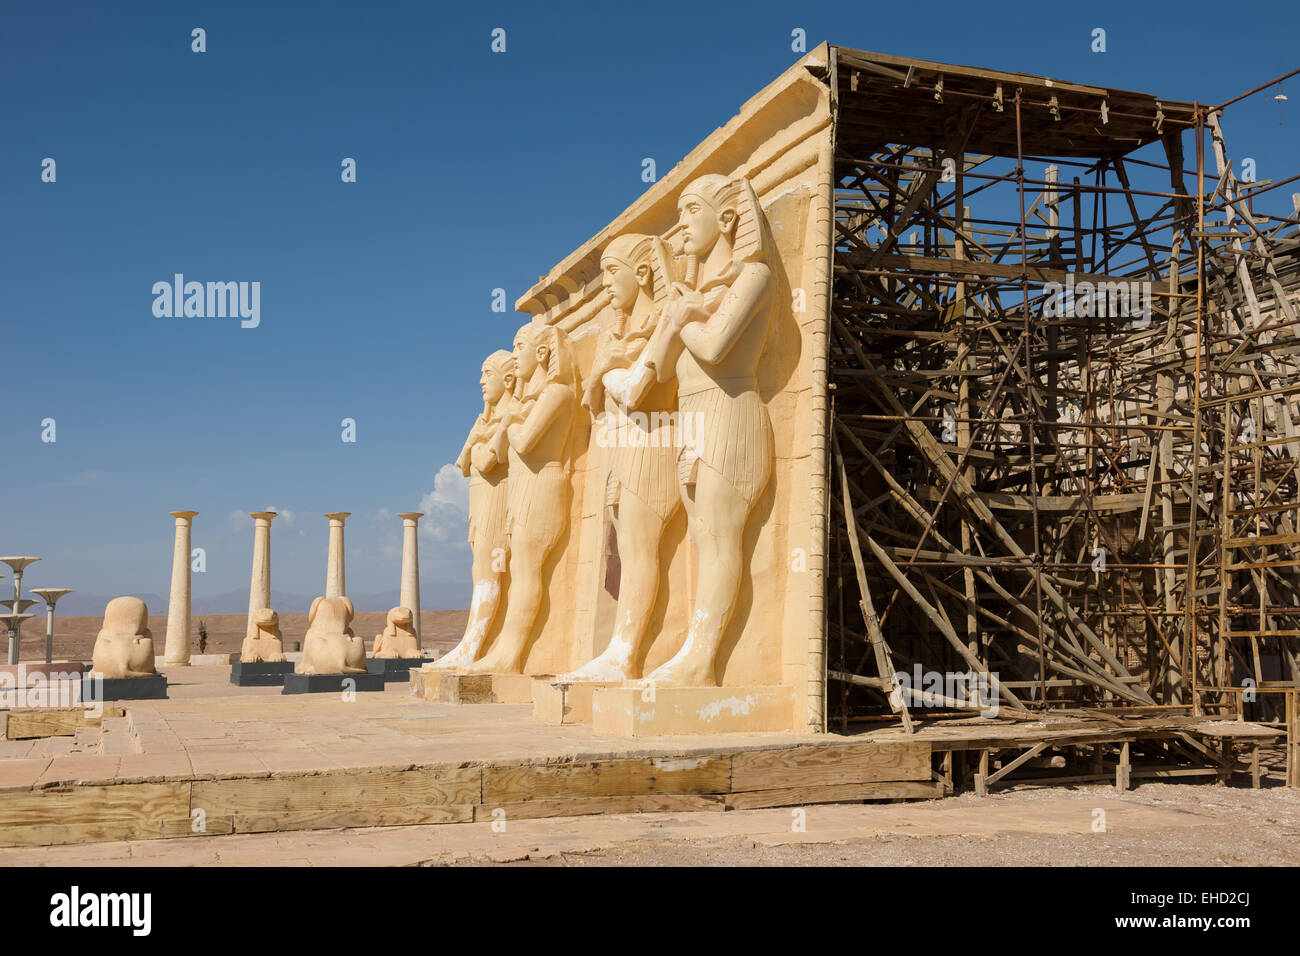 Egyptian themed film set used as the exterior of a house in Asterix & Obelix: Mission Cleopatra, Atlas Corporation Film Studios, Ouarzazate, Morocco Stock Photo